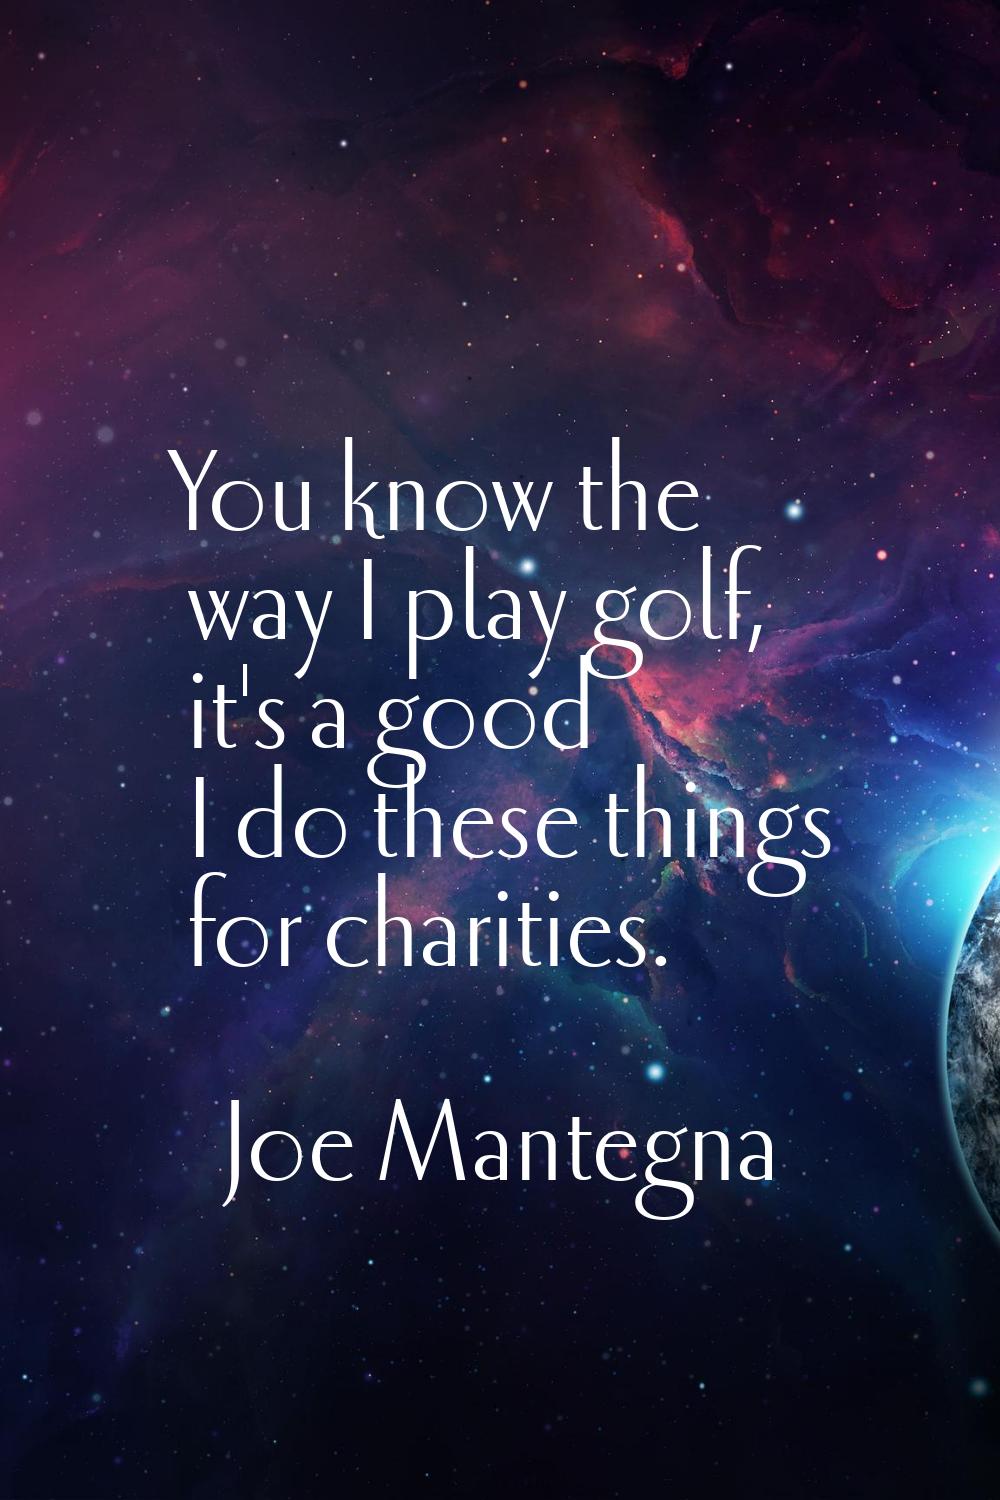 You know the way I play golf, it's a good I do these things for charities.